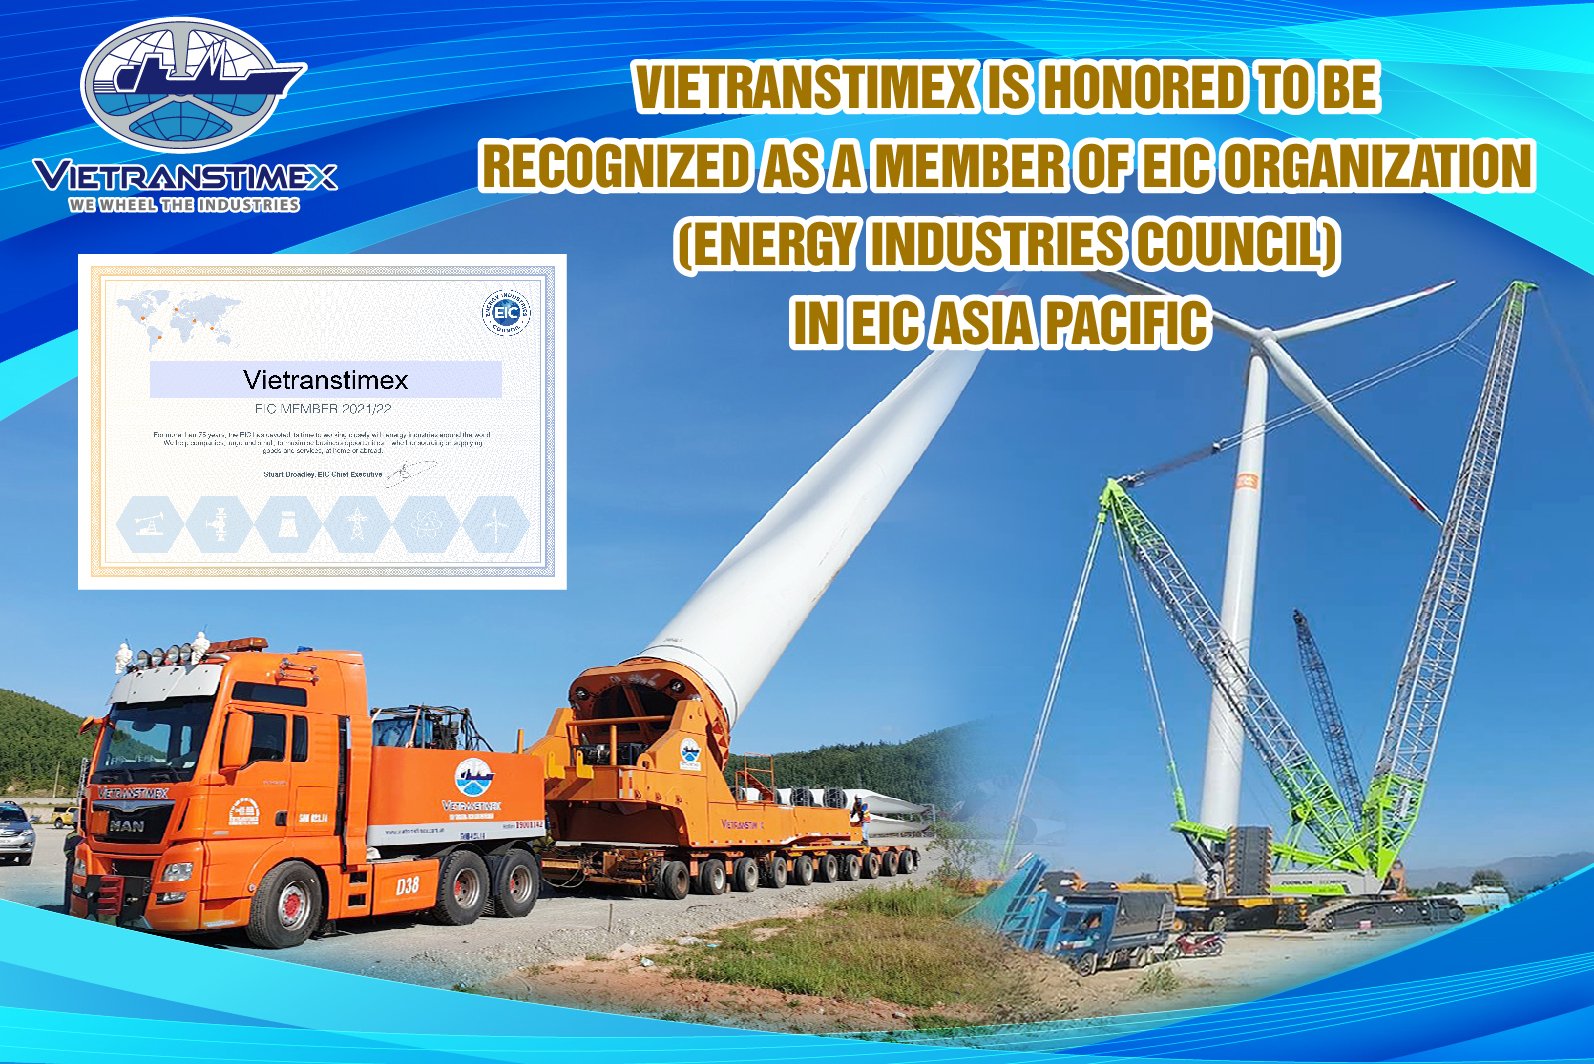 Vietranstimex Is Honored To Be Recognized As A Member Of EIC Organization (Energy Industries Council) In EIC Asia Pacific